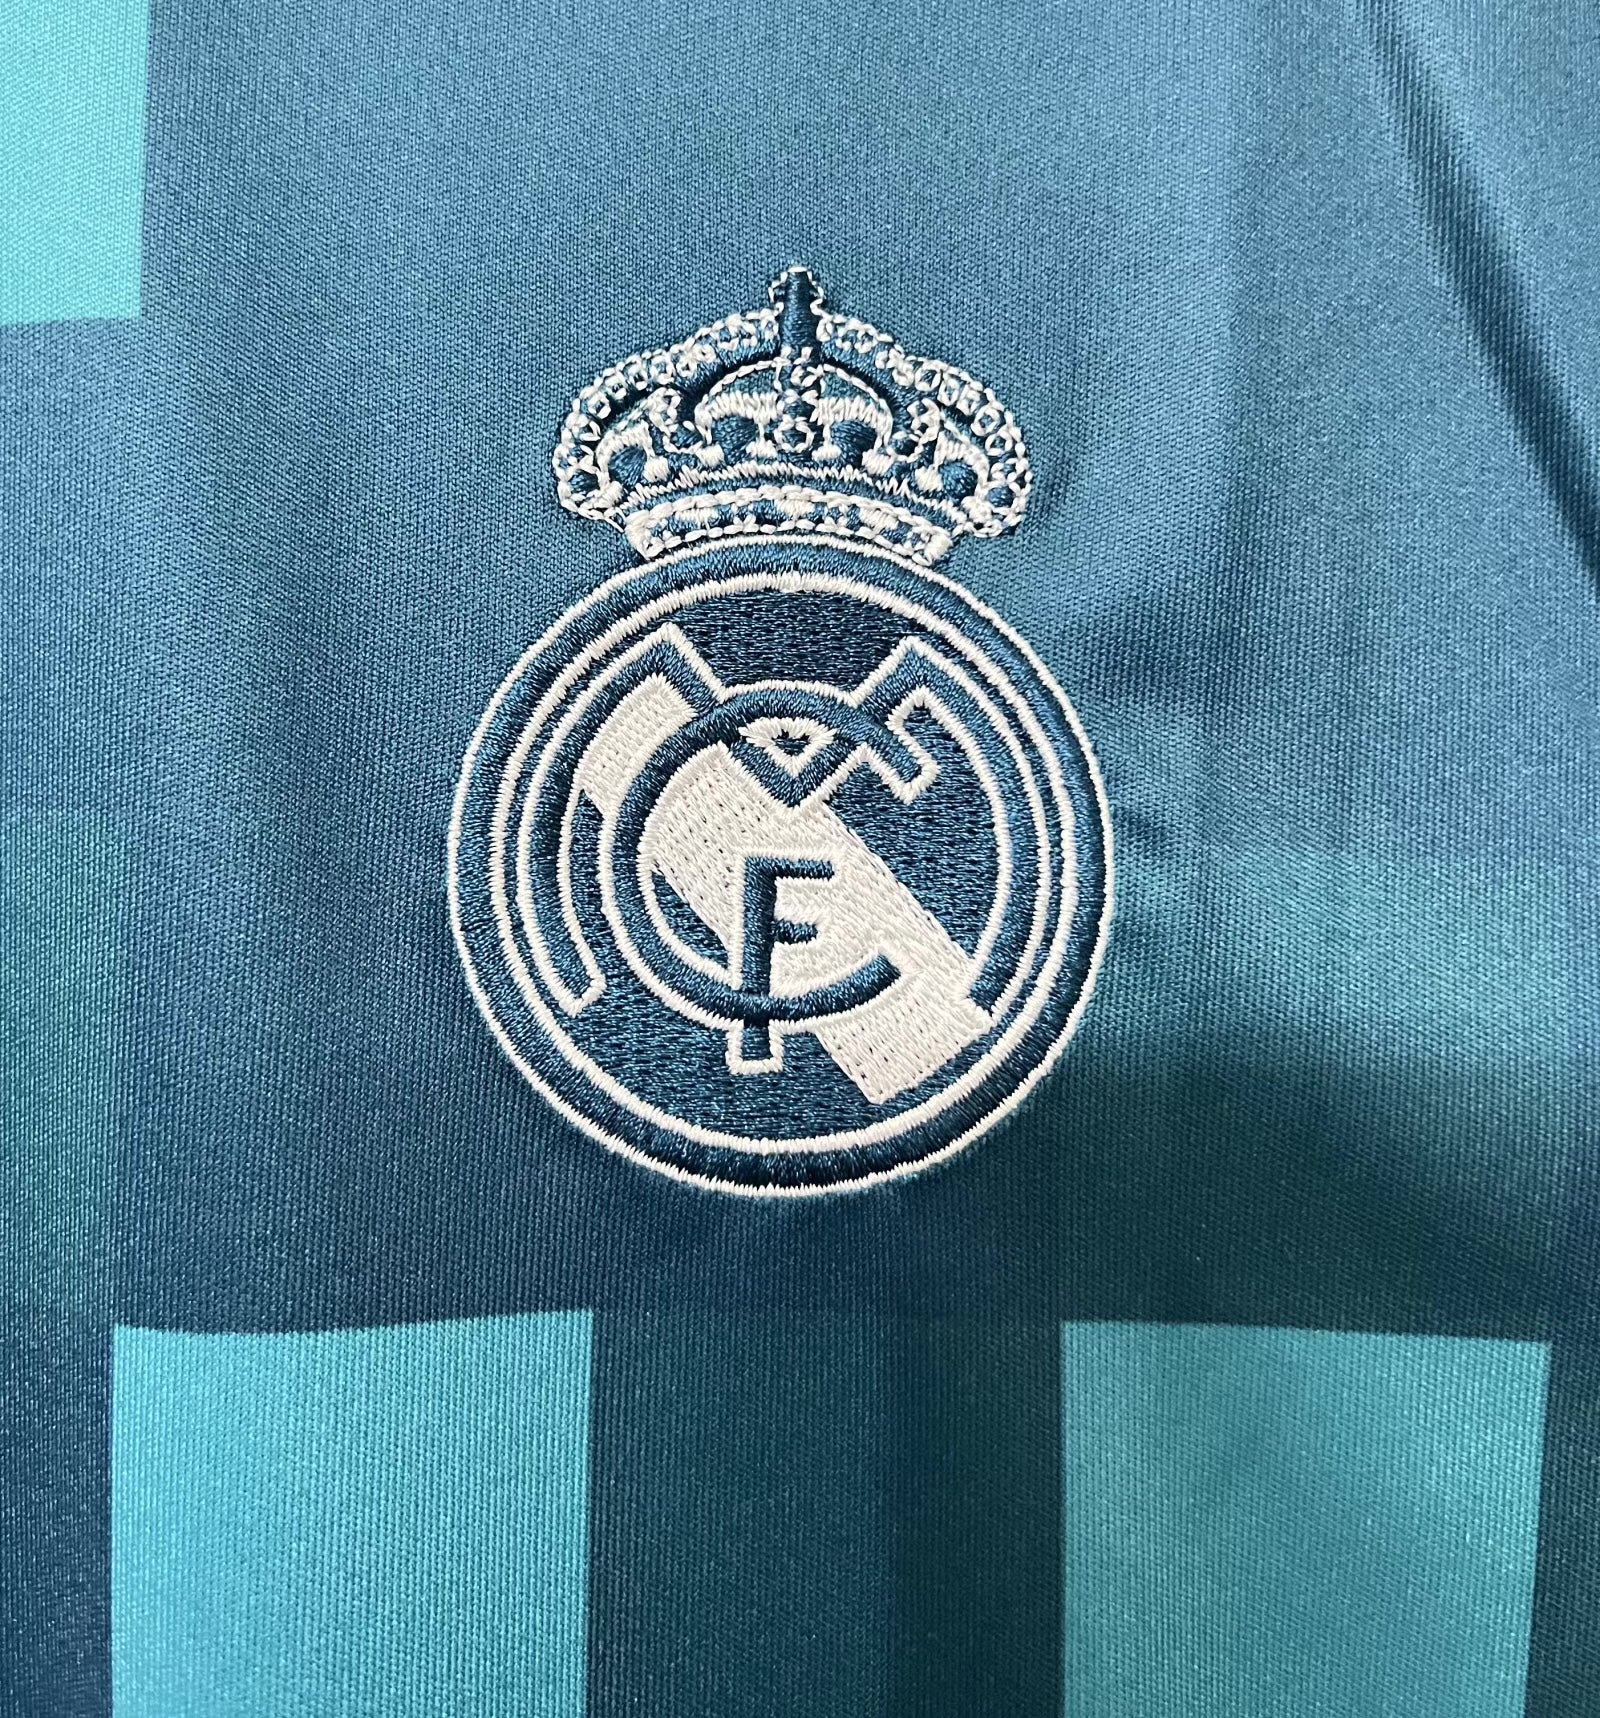 Real Madrid Third Jersey 17/18 Soccer Kit Champions League